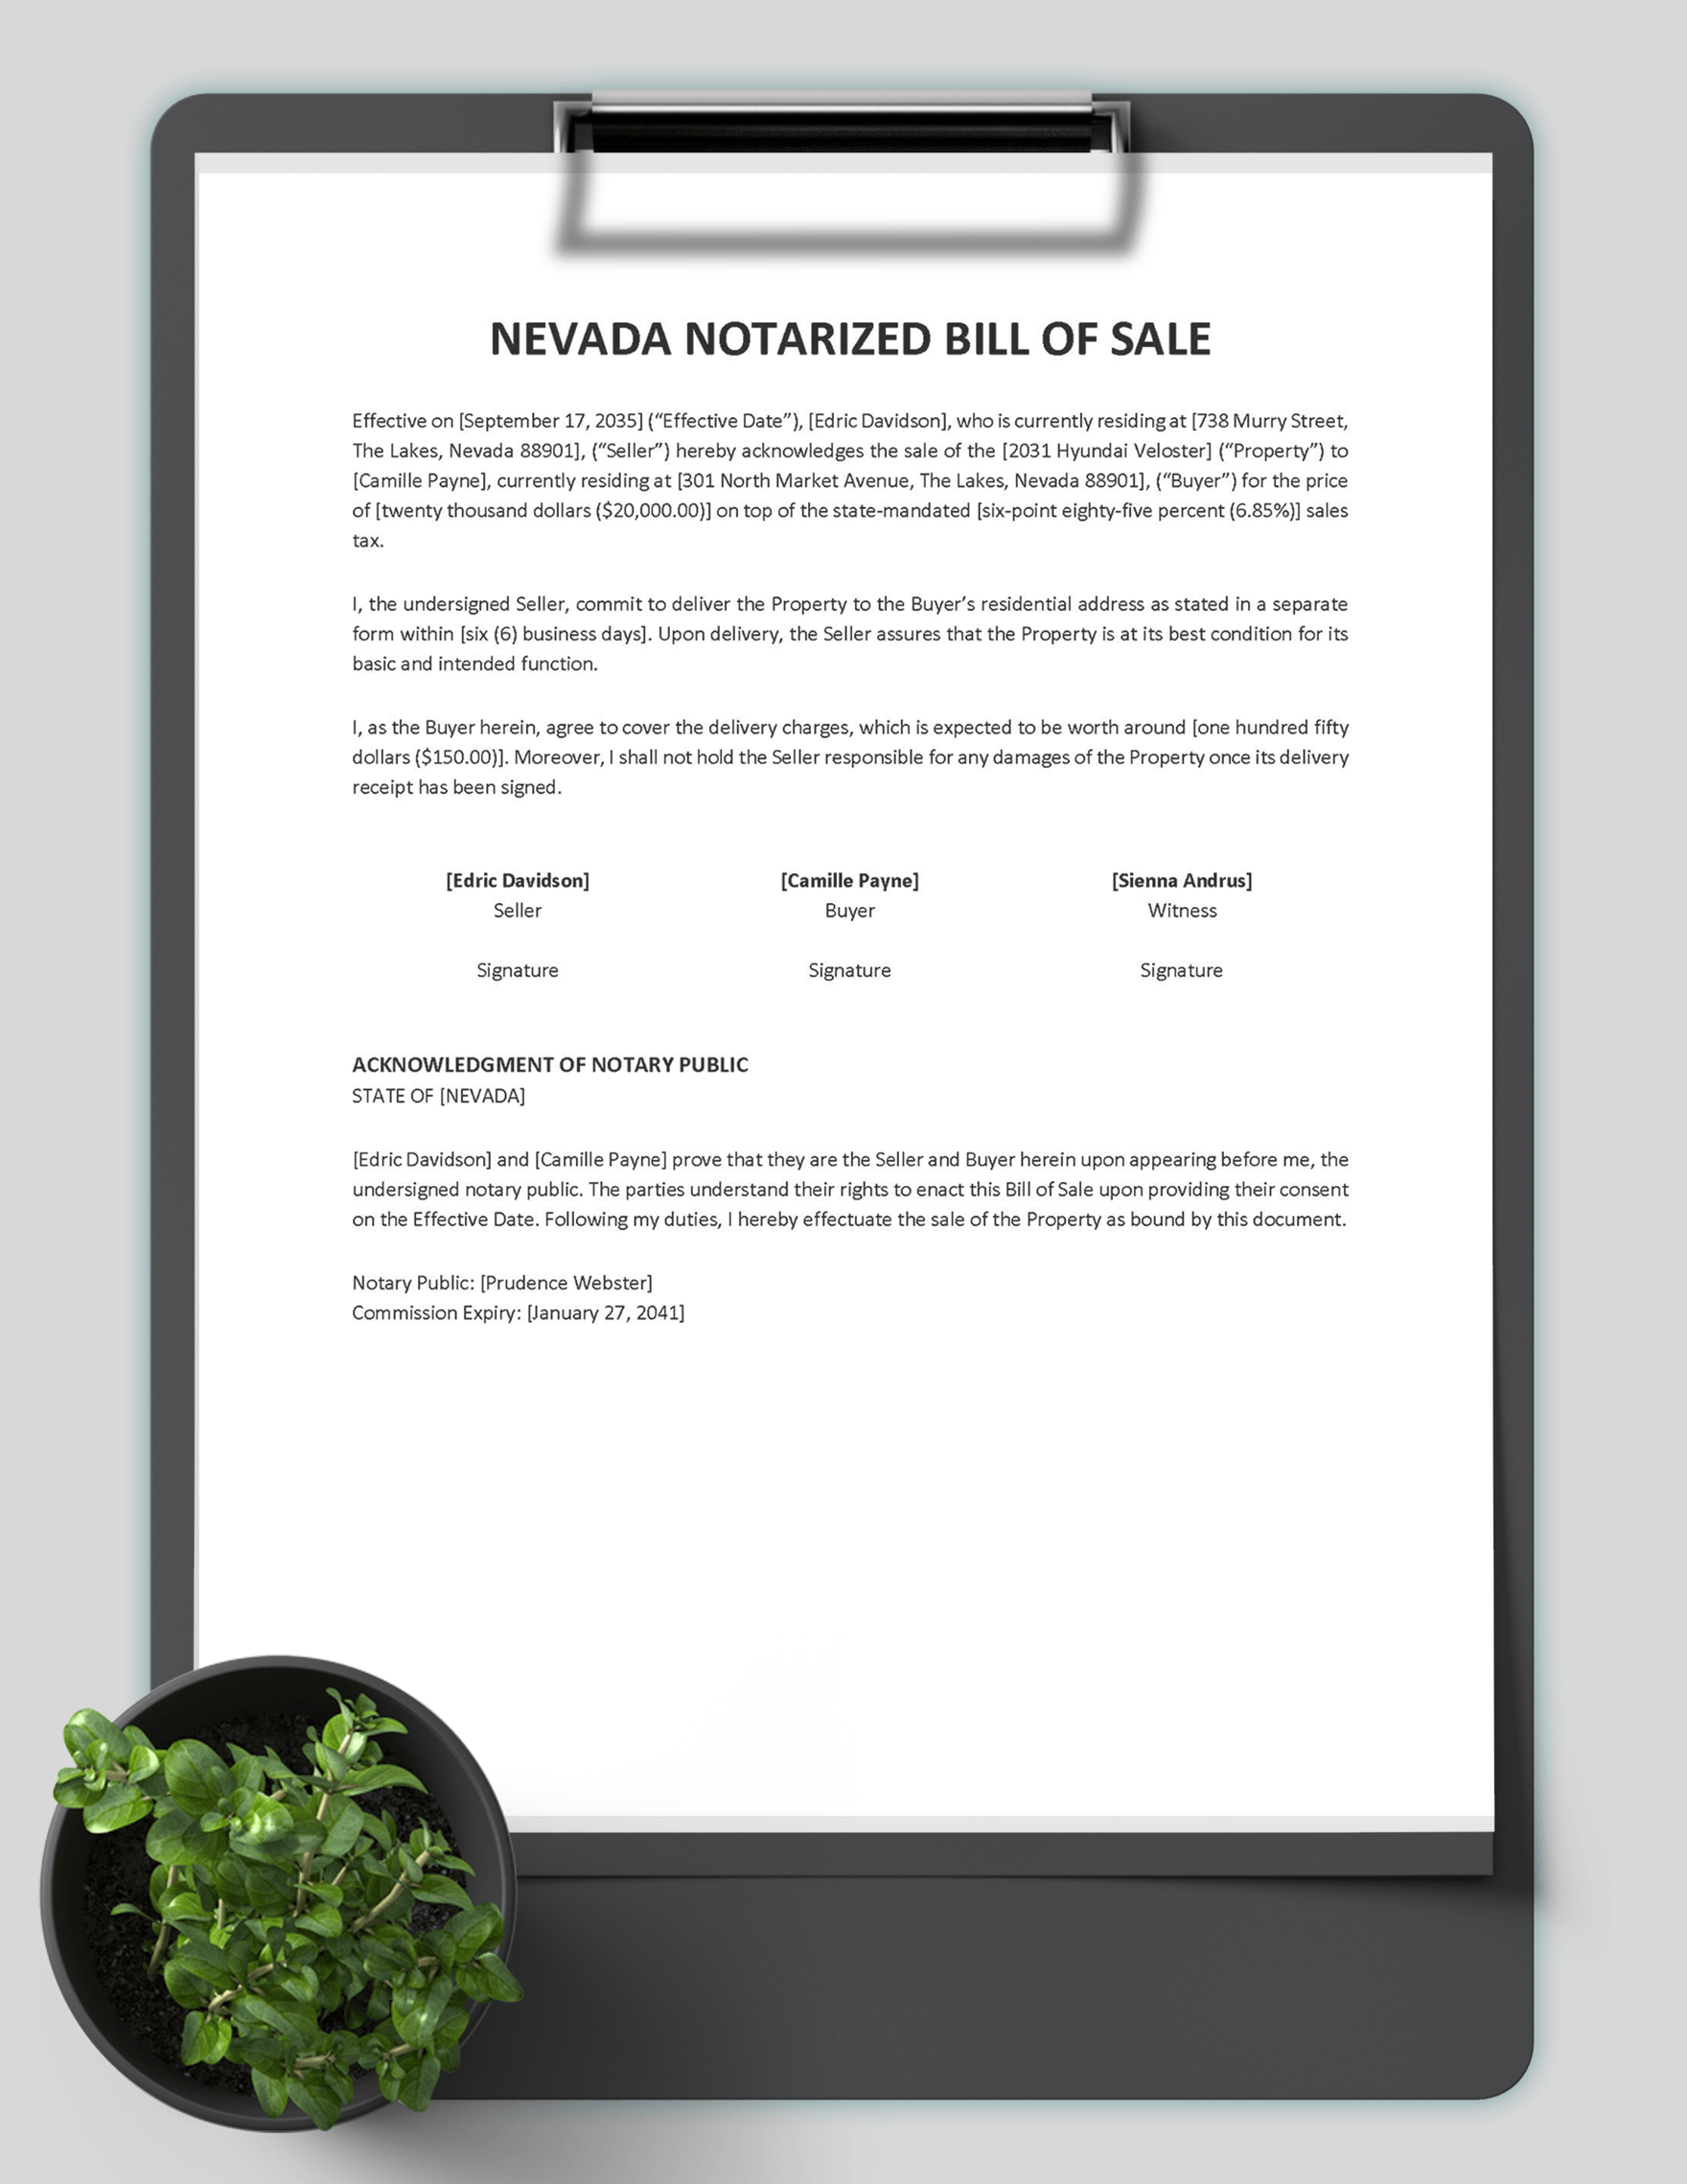 Nevada Notarized Bill of Sale Template